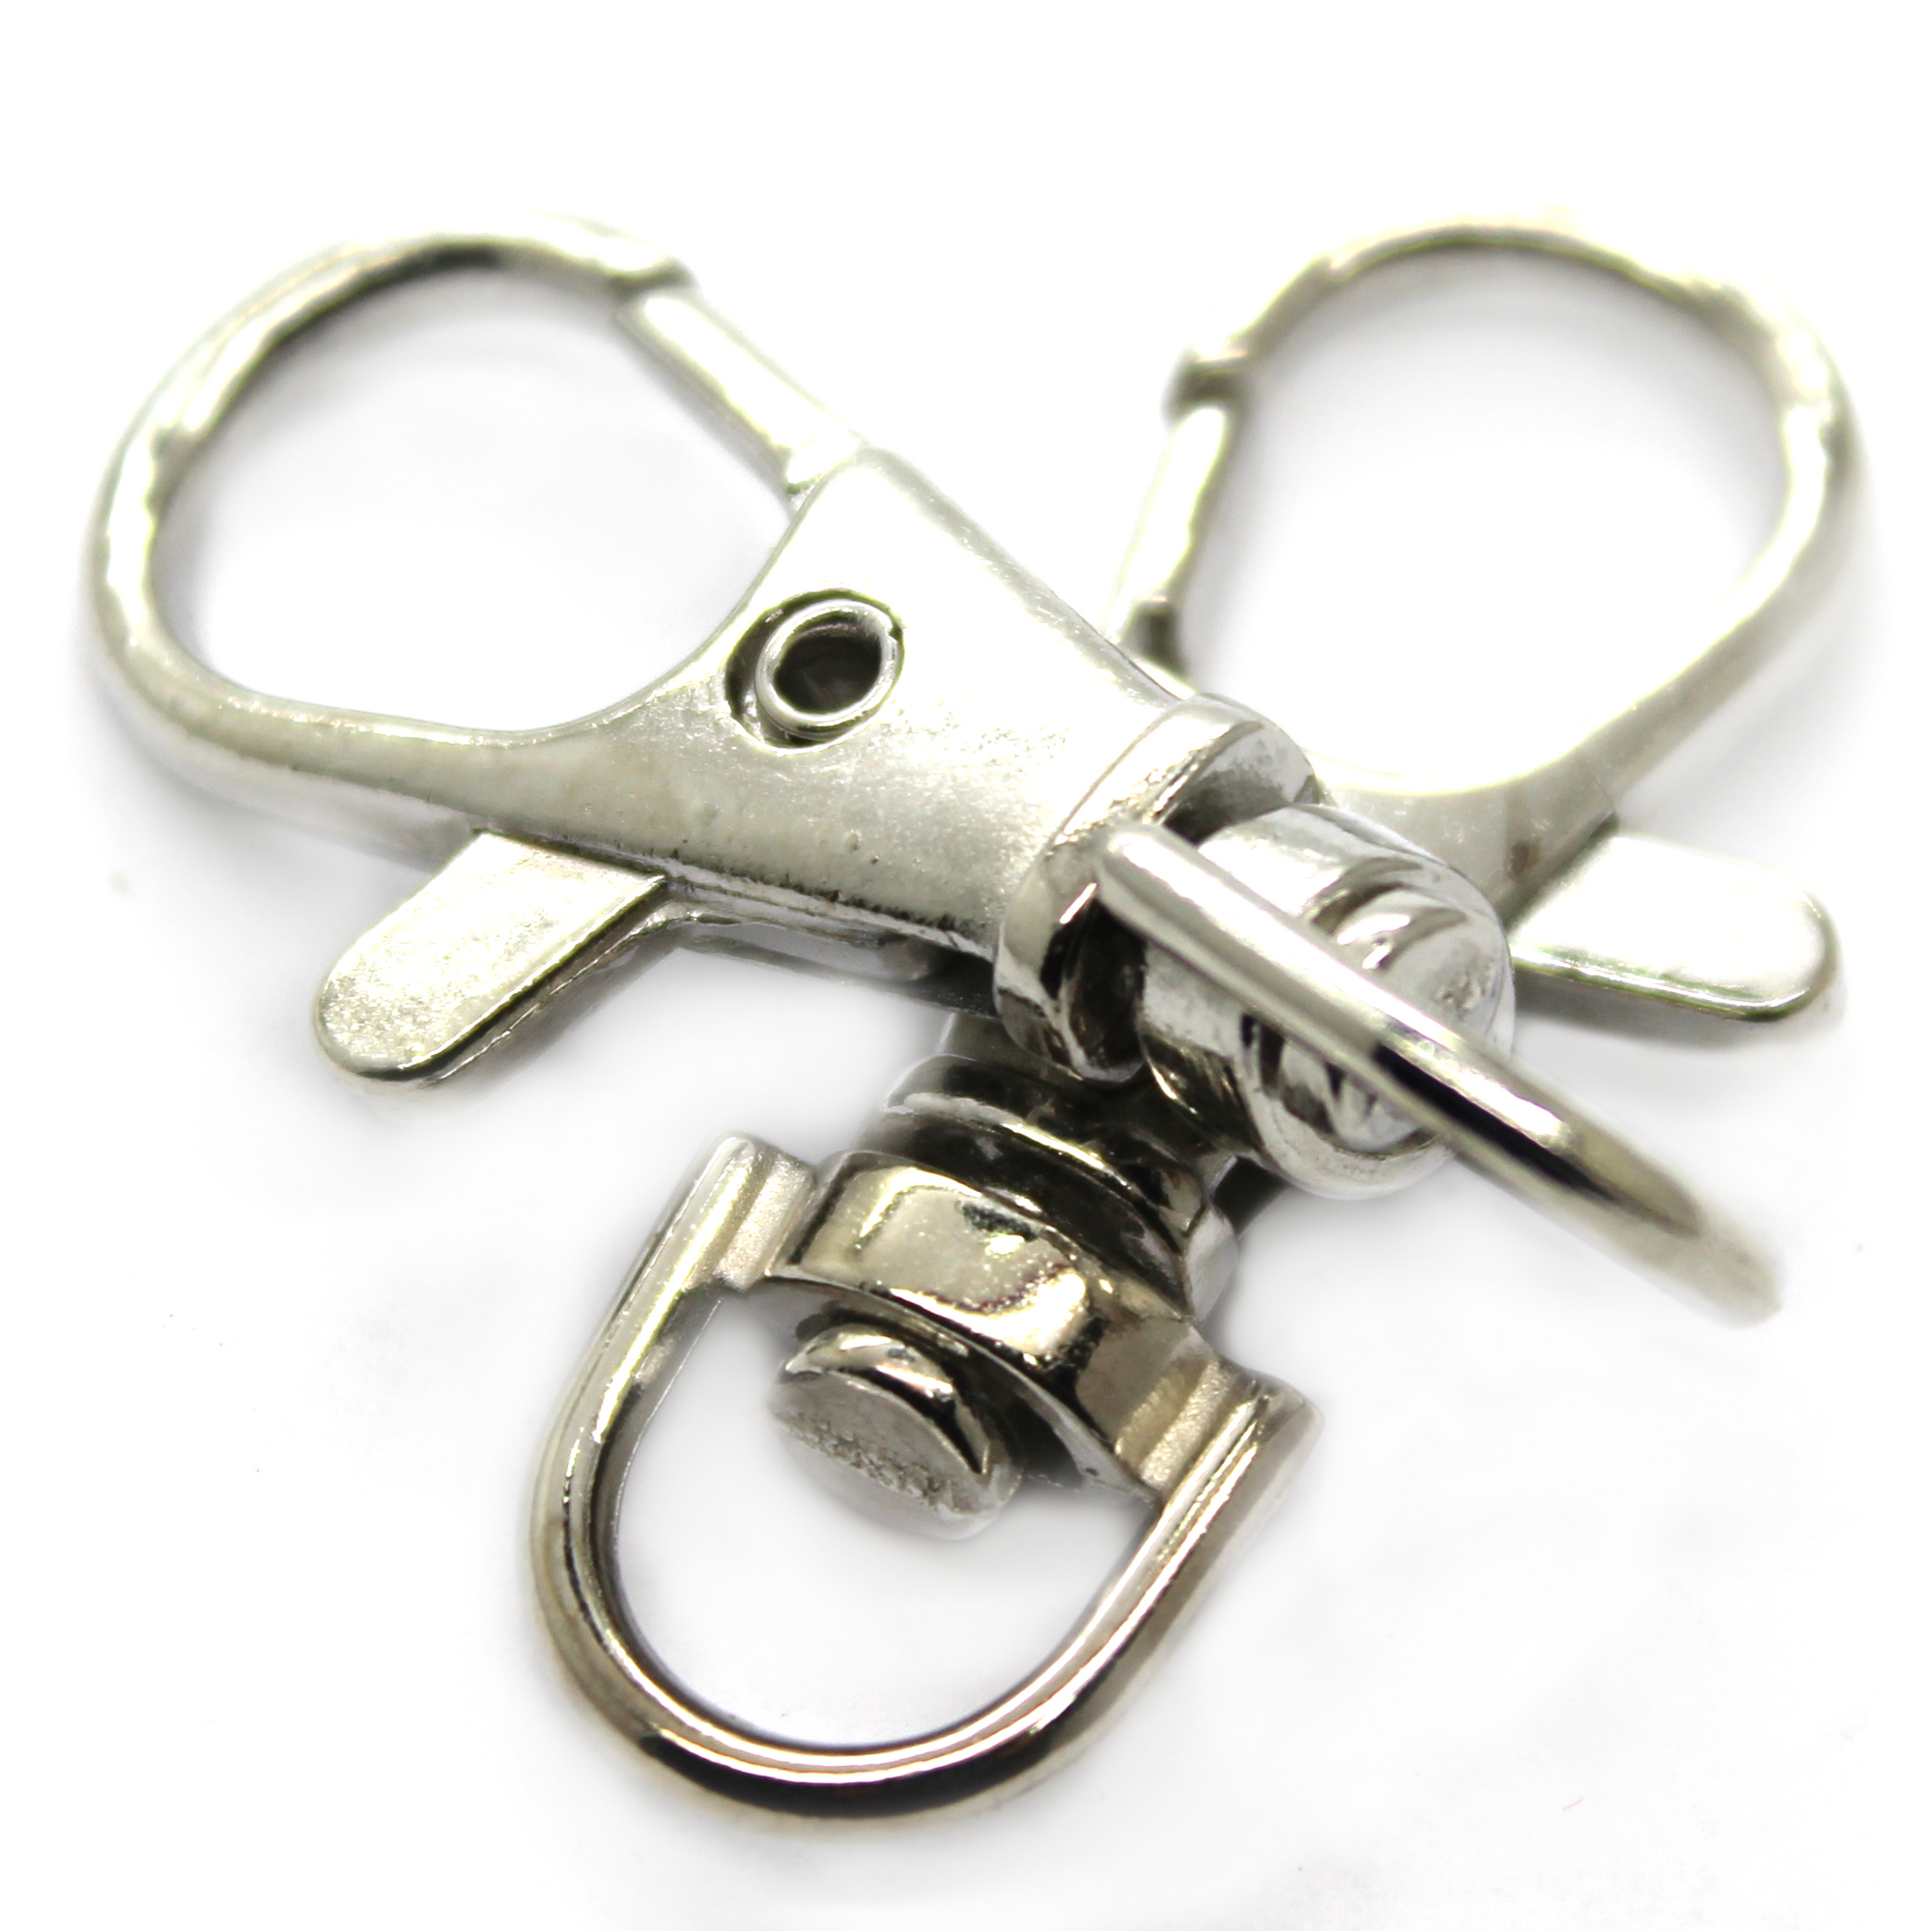 Clasp, Lobster Clasp with Handle, Silver, Stainless Steel, 37mm x 15mm x 4mm, Sold Per pkg of 6